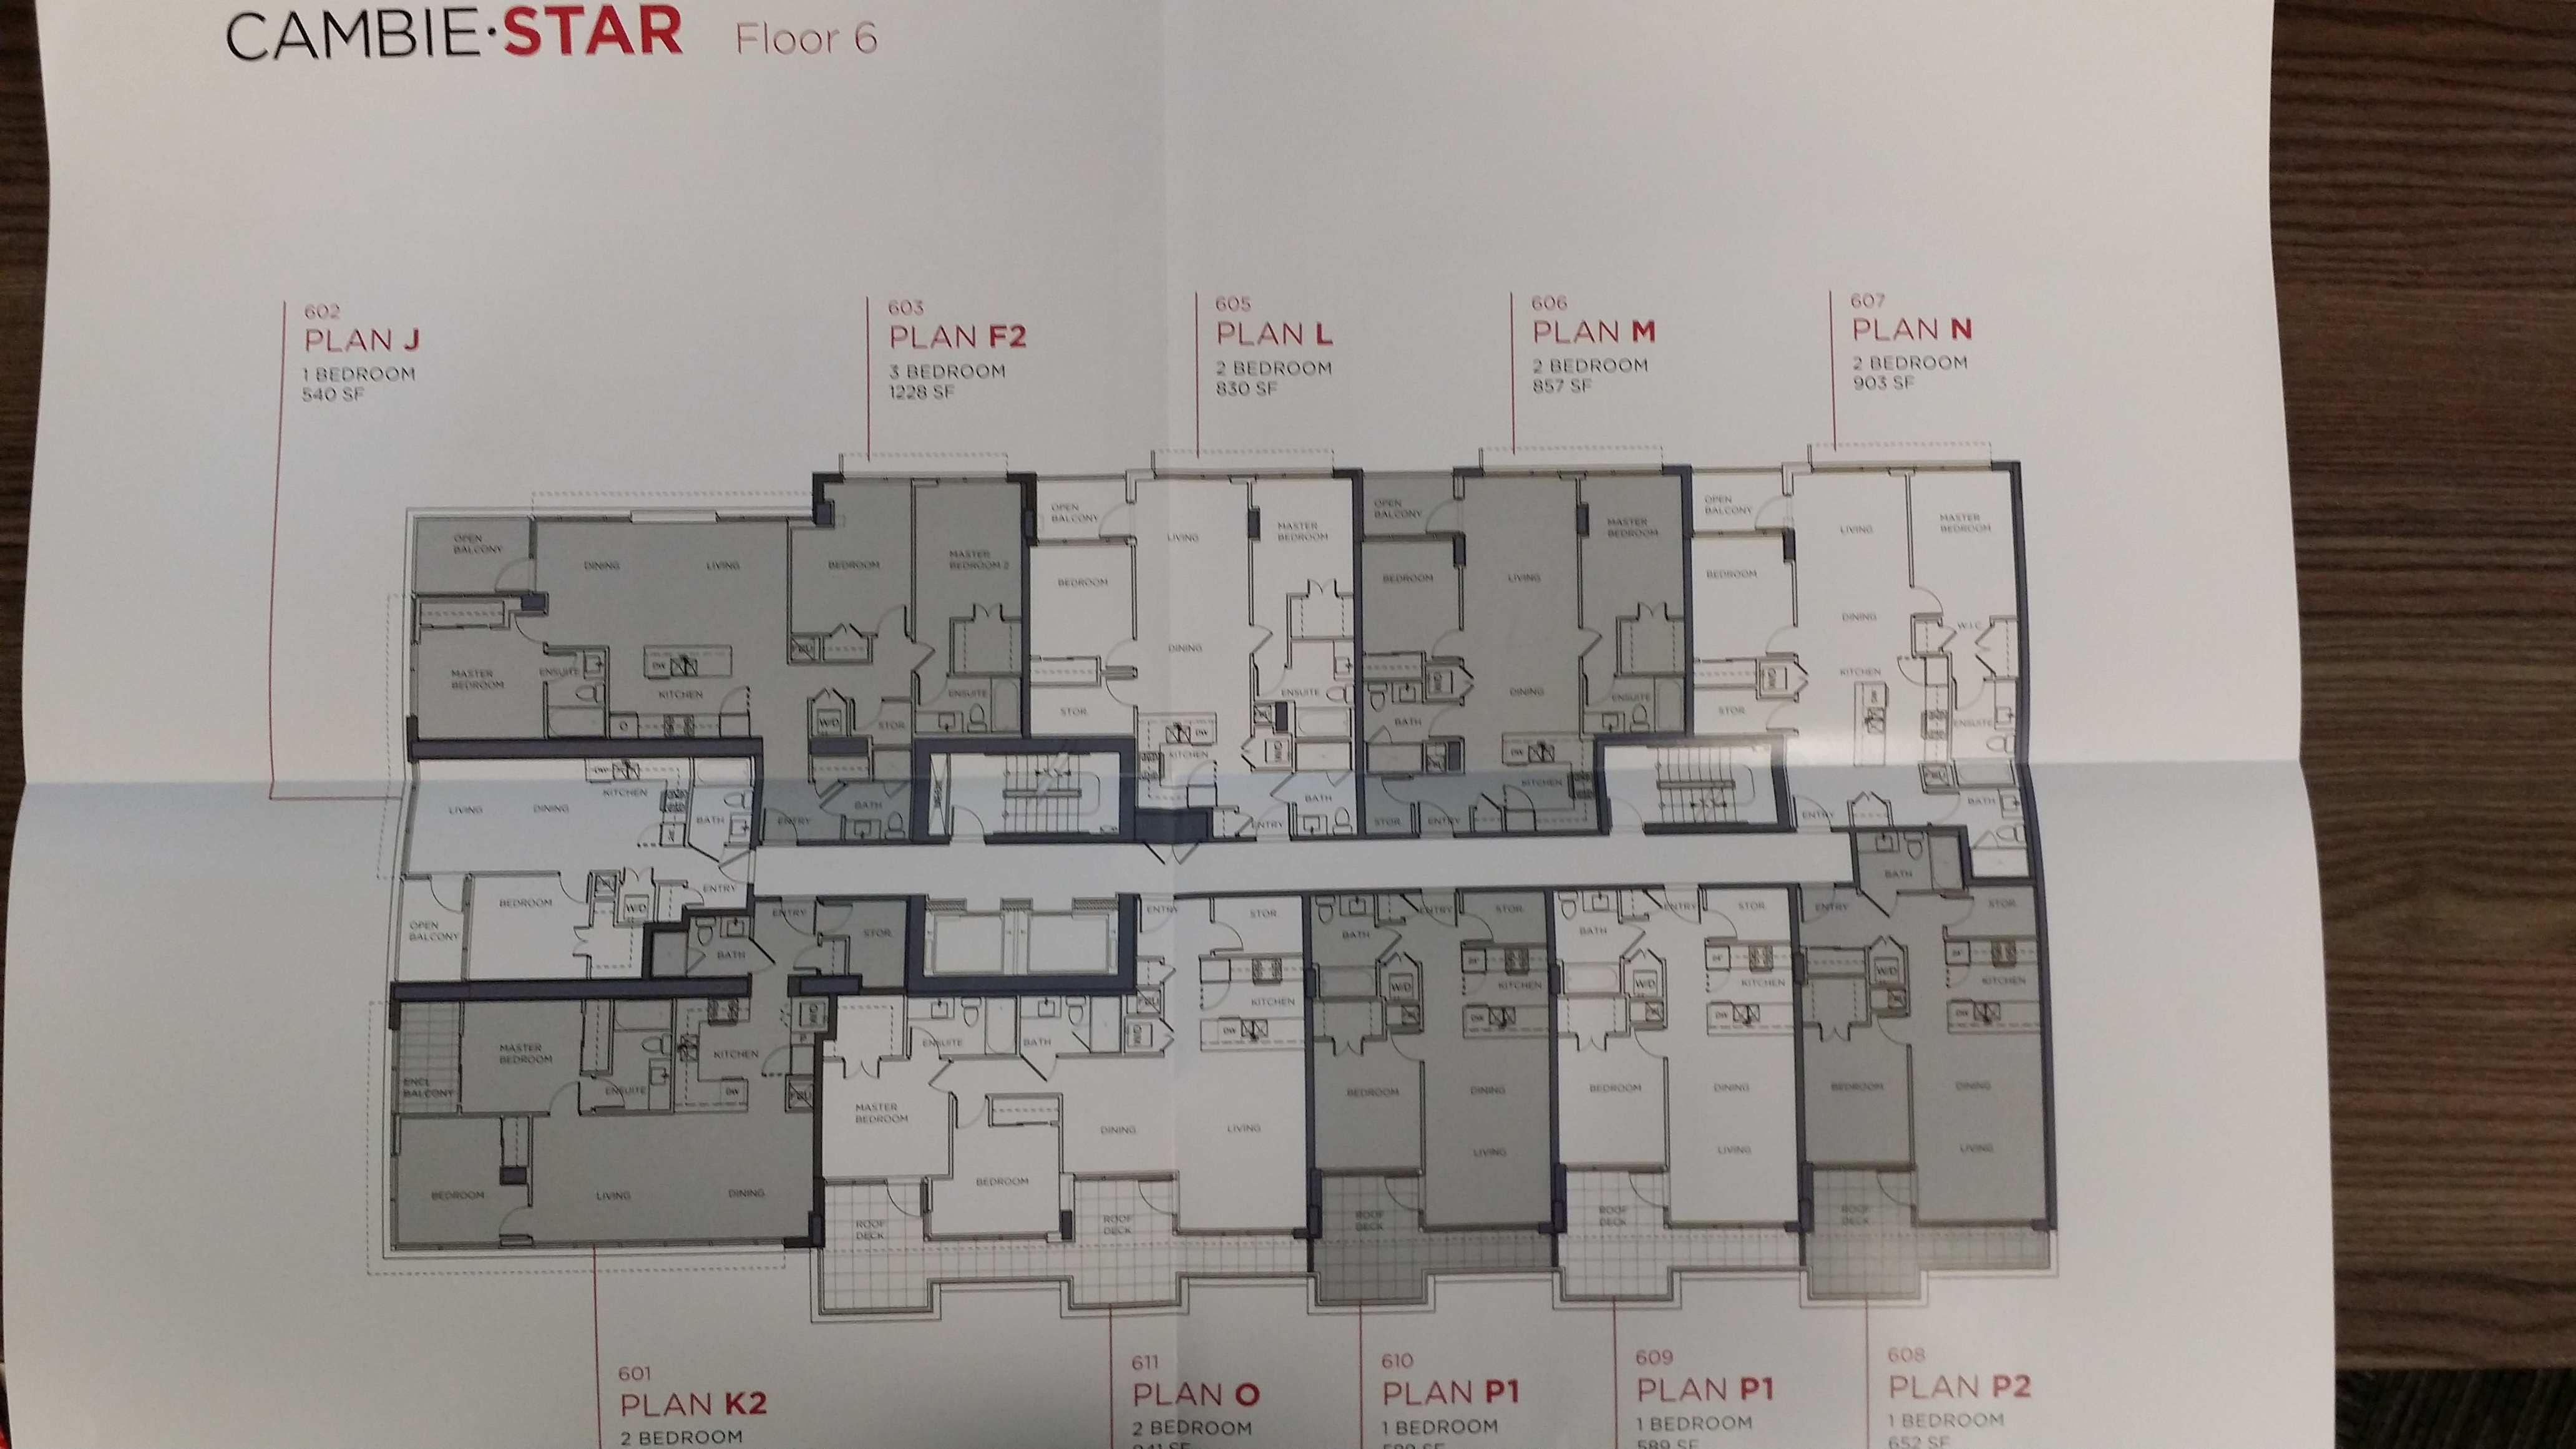 Cambie Star 6th Floor Plans